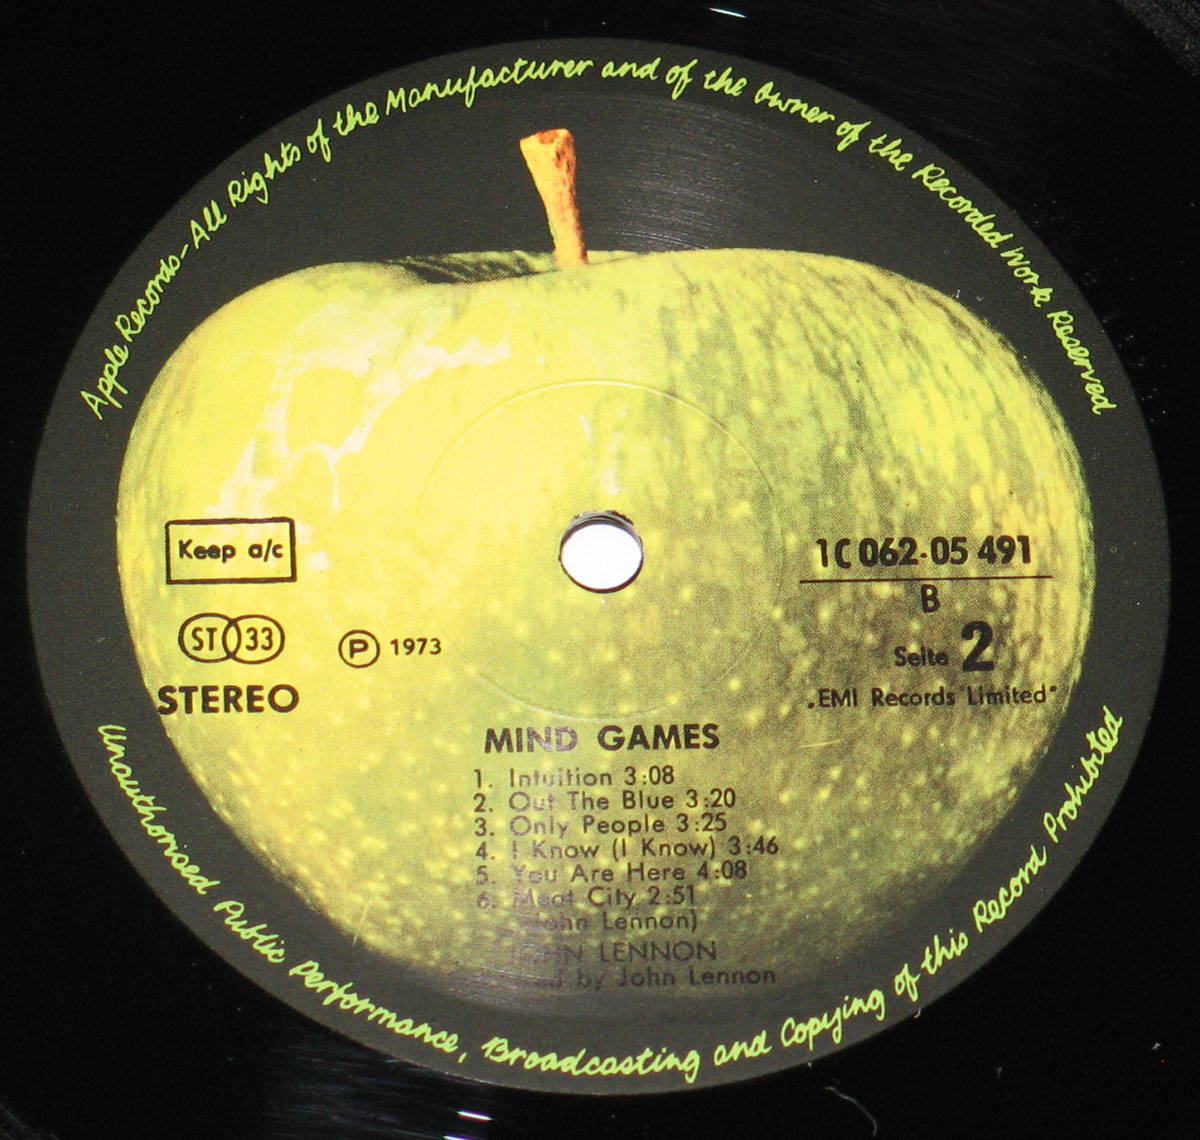 Close-Up of the APPLE Record Label for John Lennon's Mind Games Album  